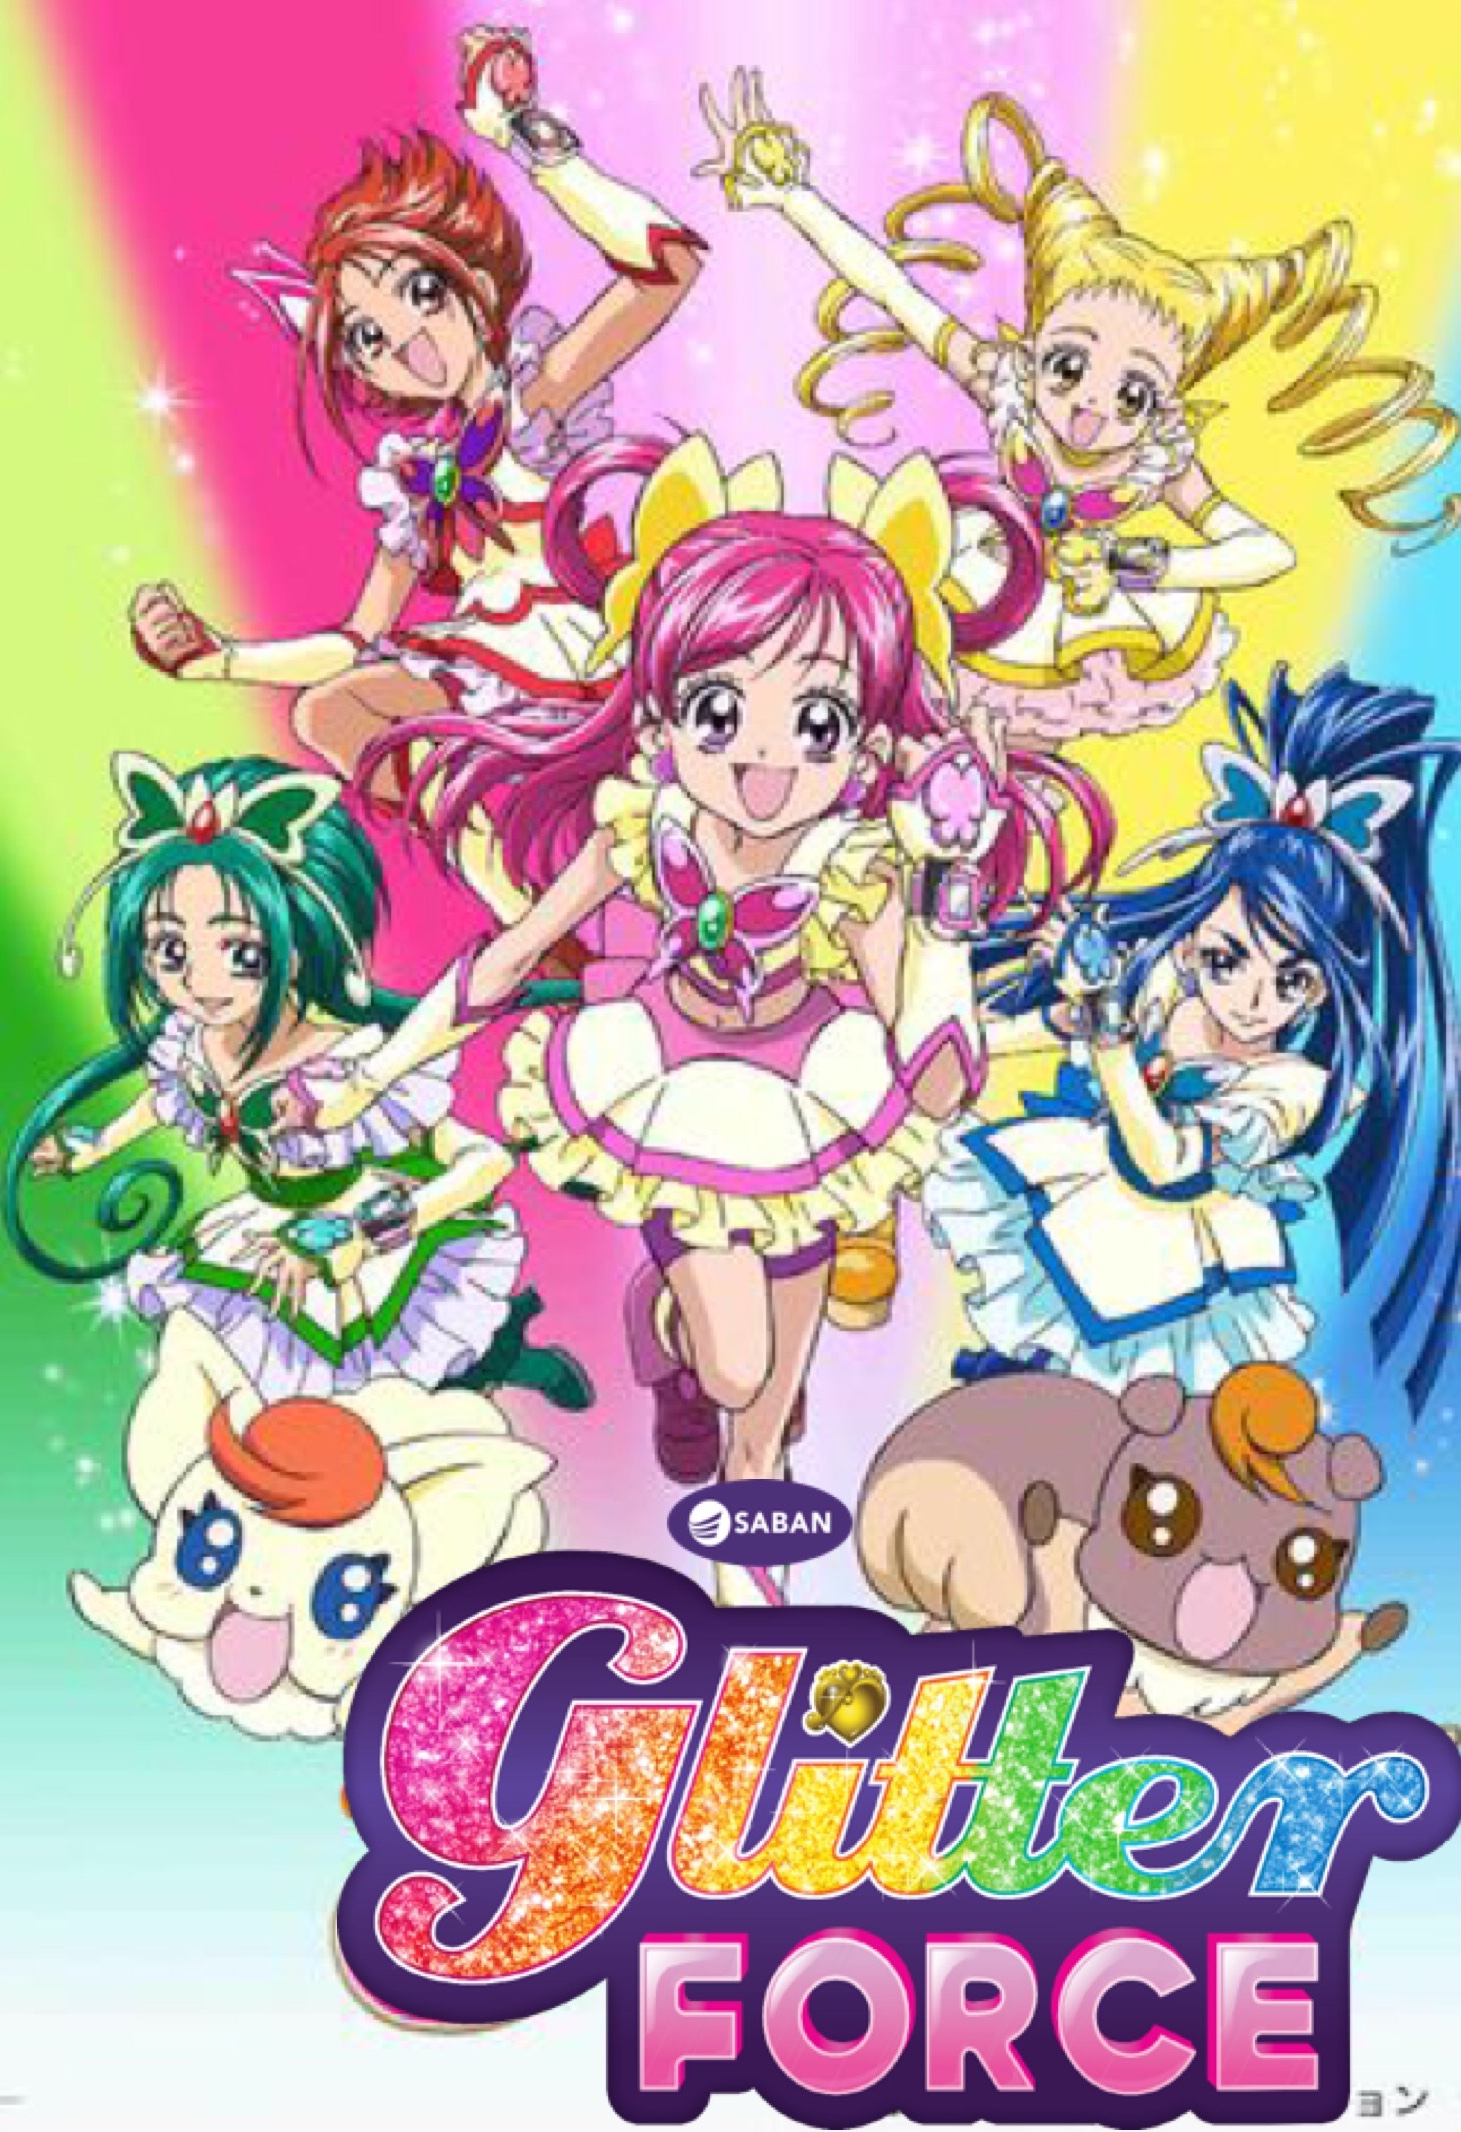 What's Streaming? : Glitter Force